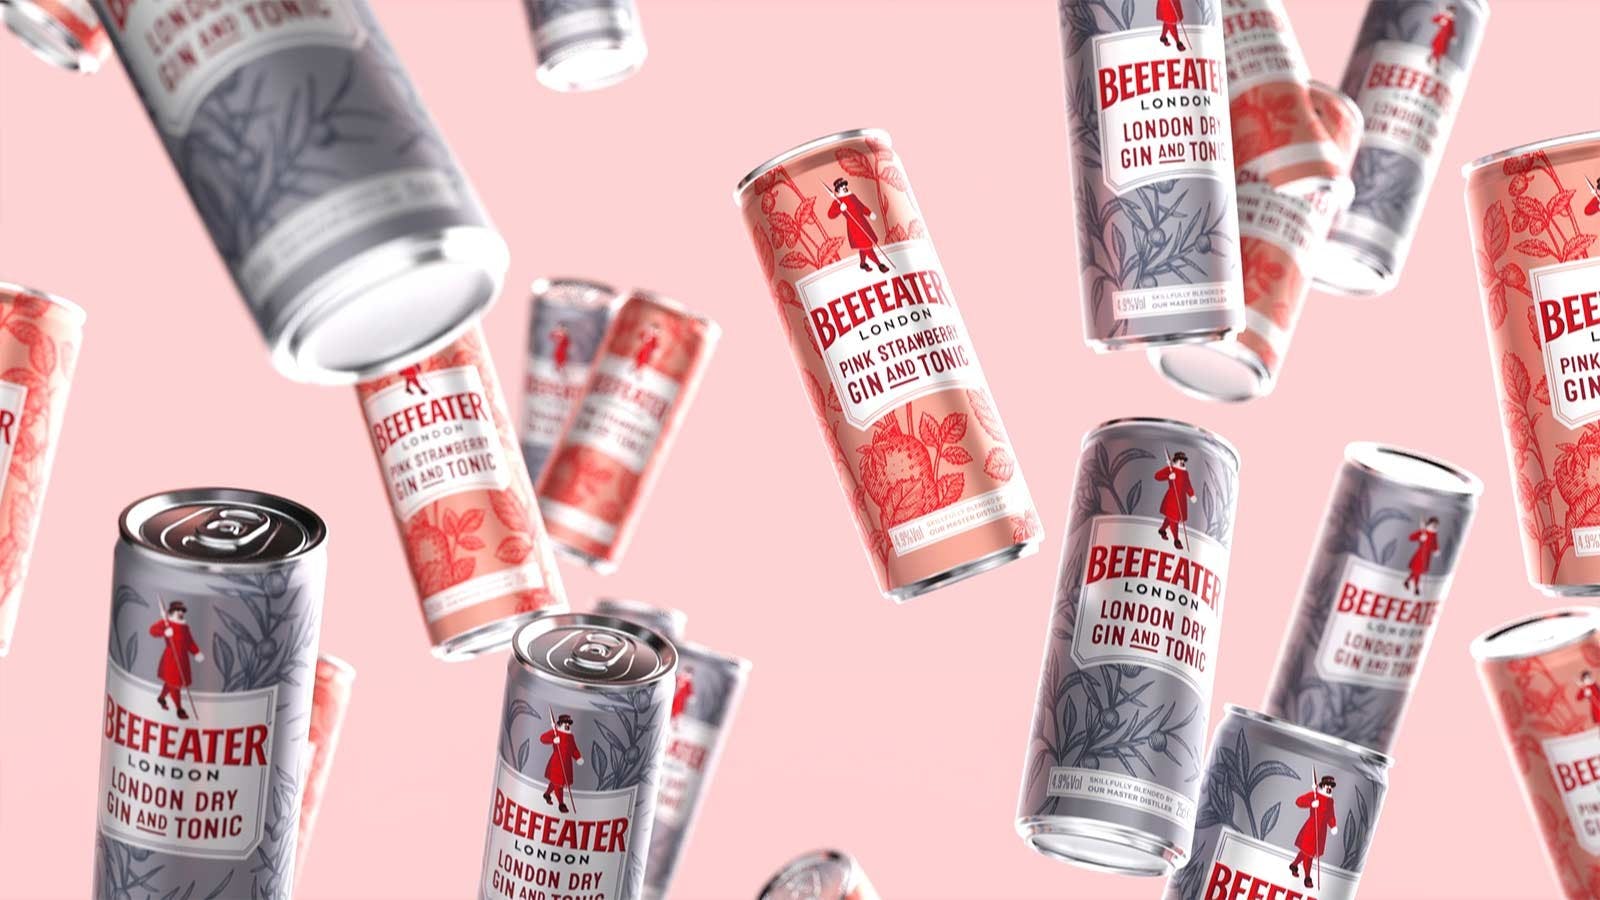 Beefeater cans falling